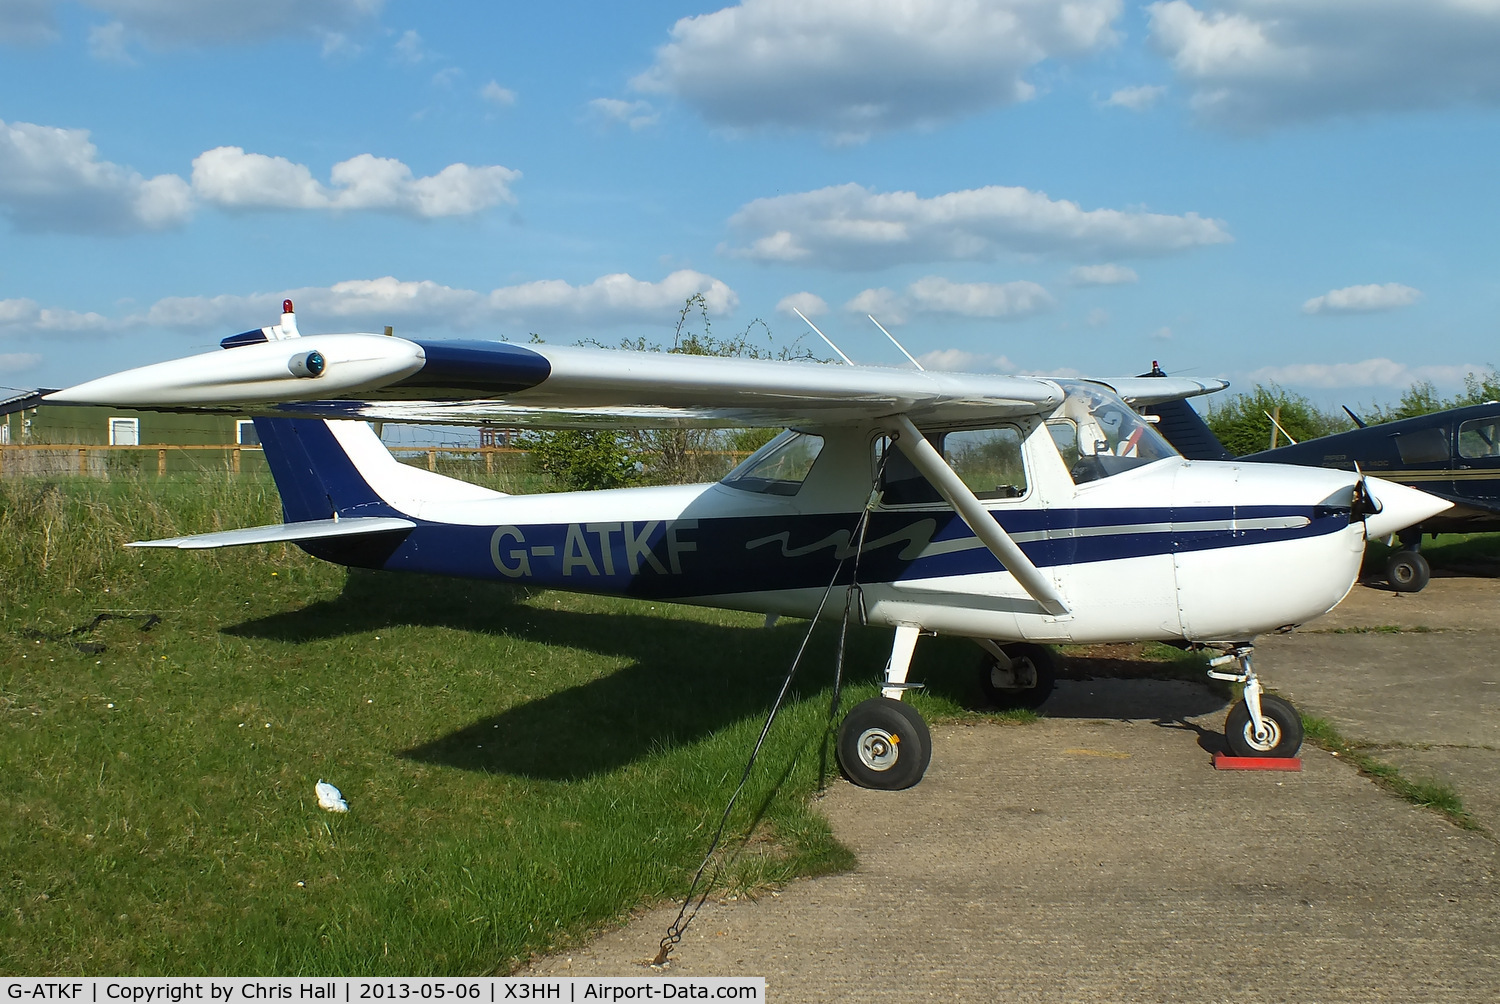 G-ATKF, 1965 Cessna 150F C/N 150-62386, at Hinton in the Hedges Airfield